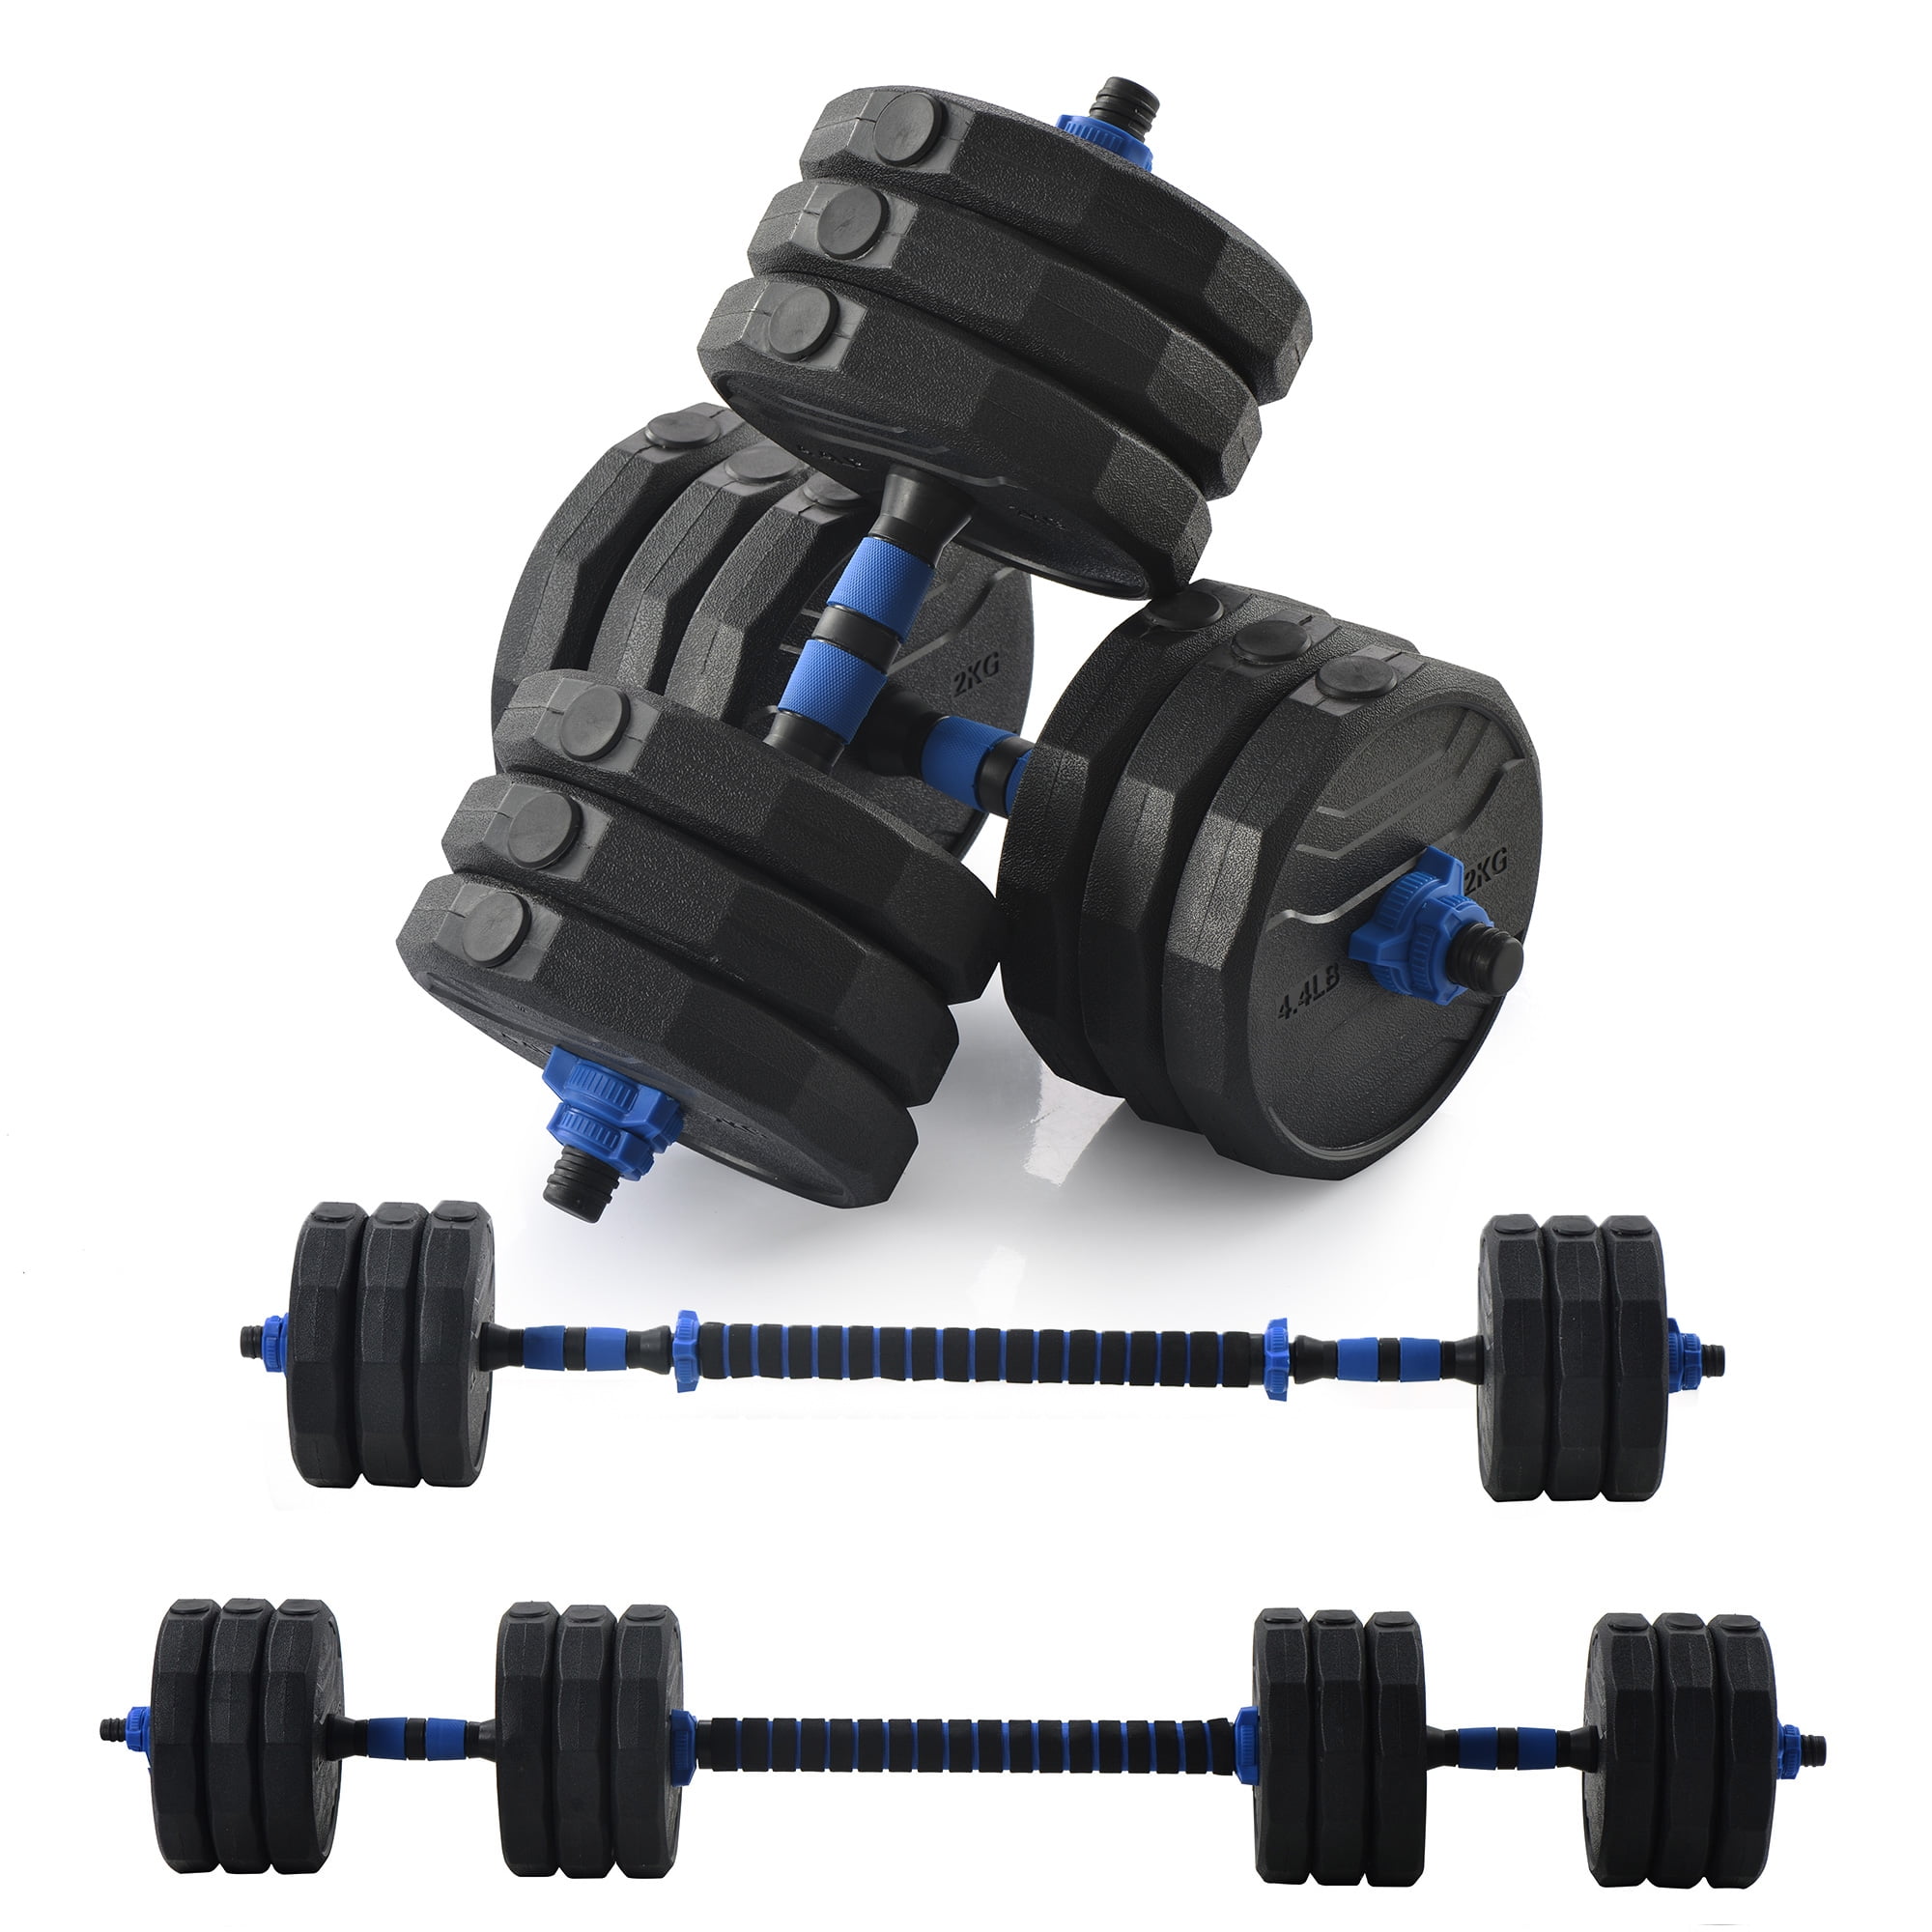 Totall 88LB Adjustable Weight Dumbbell Set Cap Gym Barbell Plates Body Workout A 